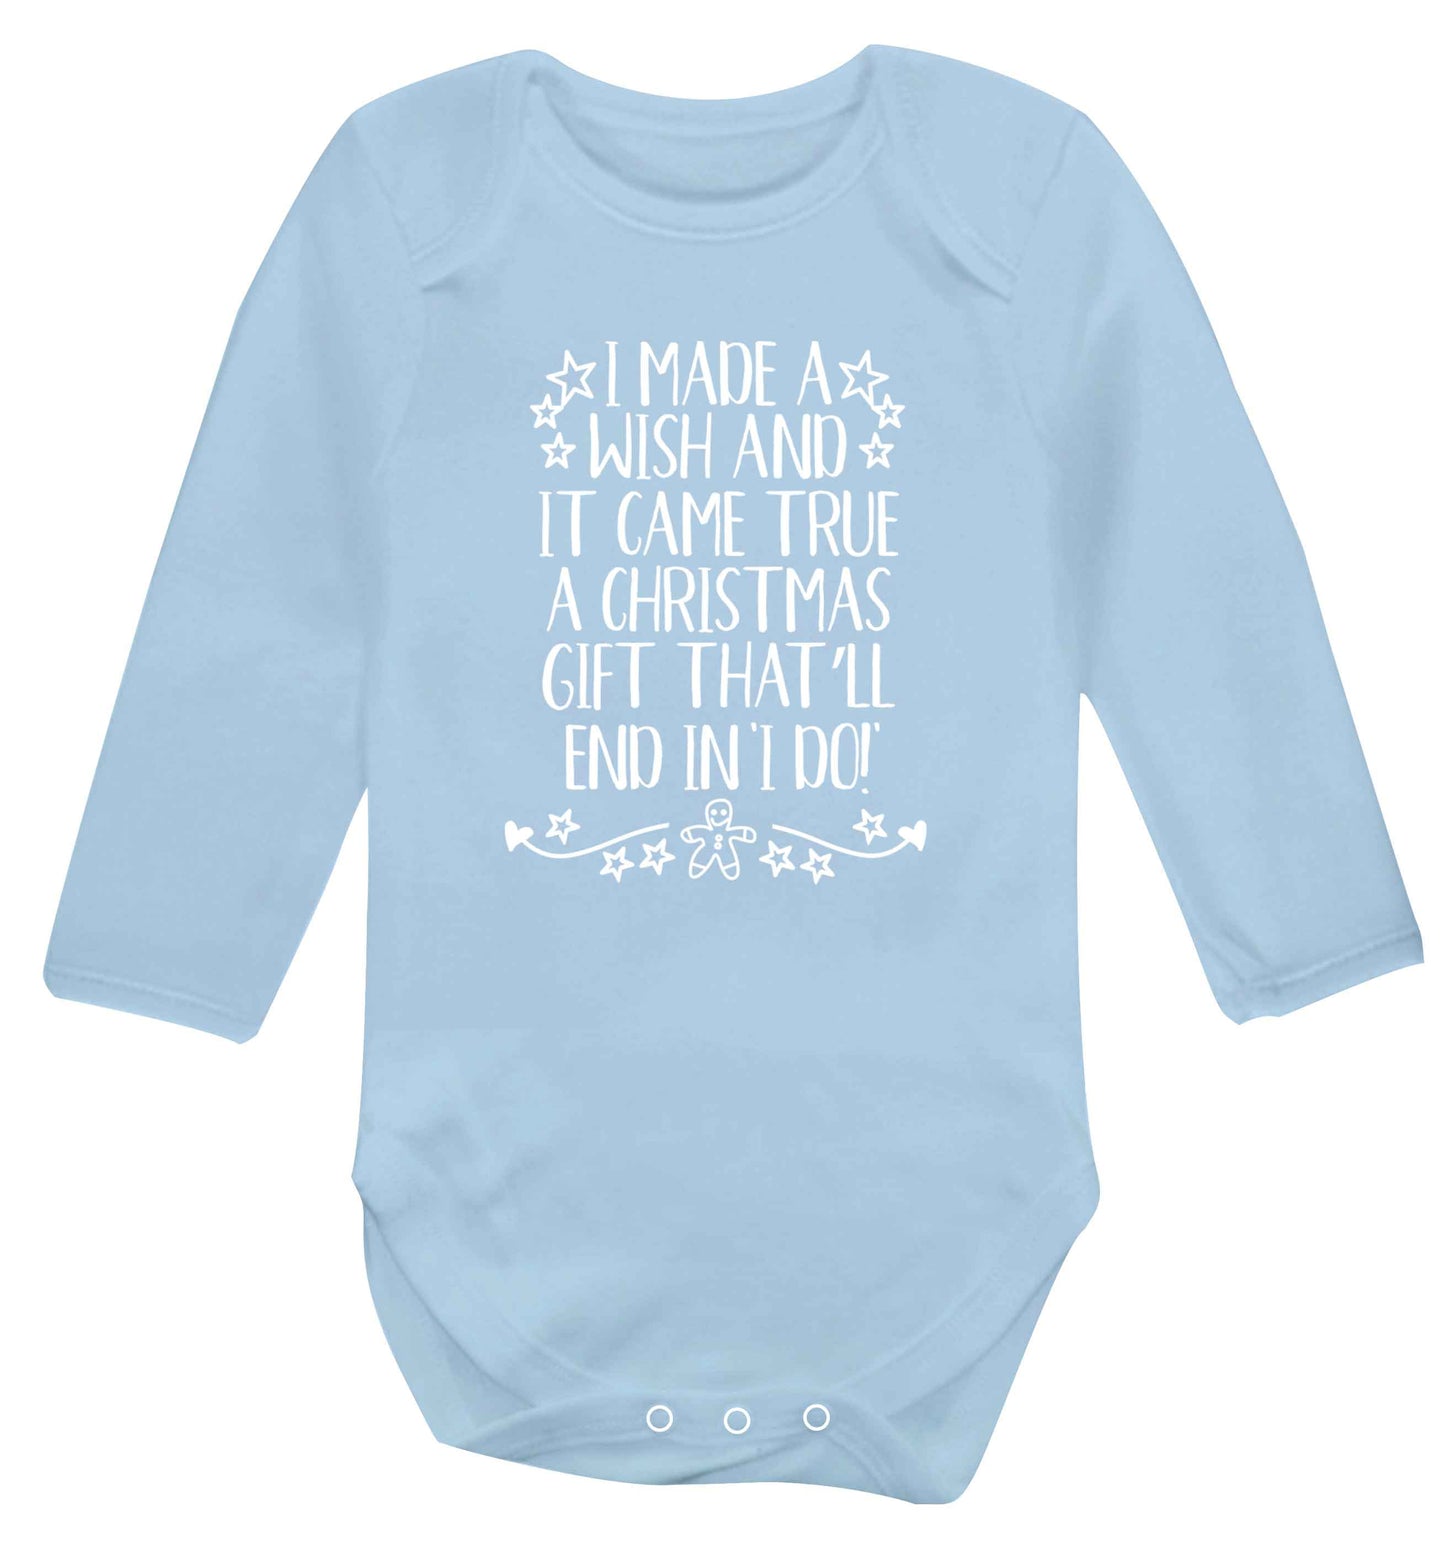 I made a wish and it came true a Christmas gift that'll end in 'I do' Baby Vest long sleeved pale blue 6-12 months